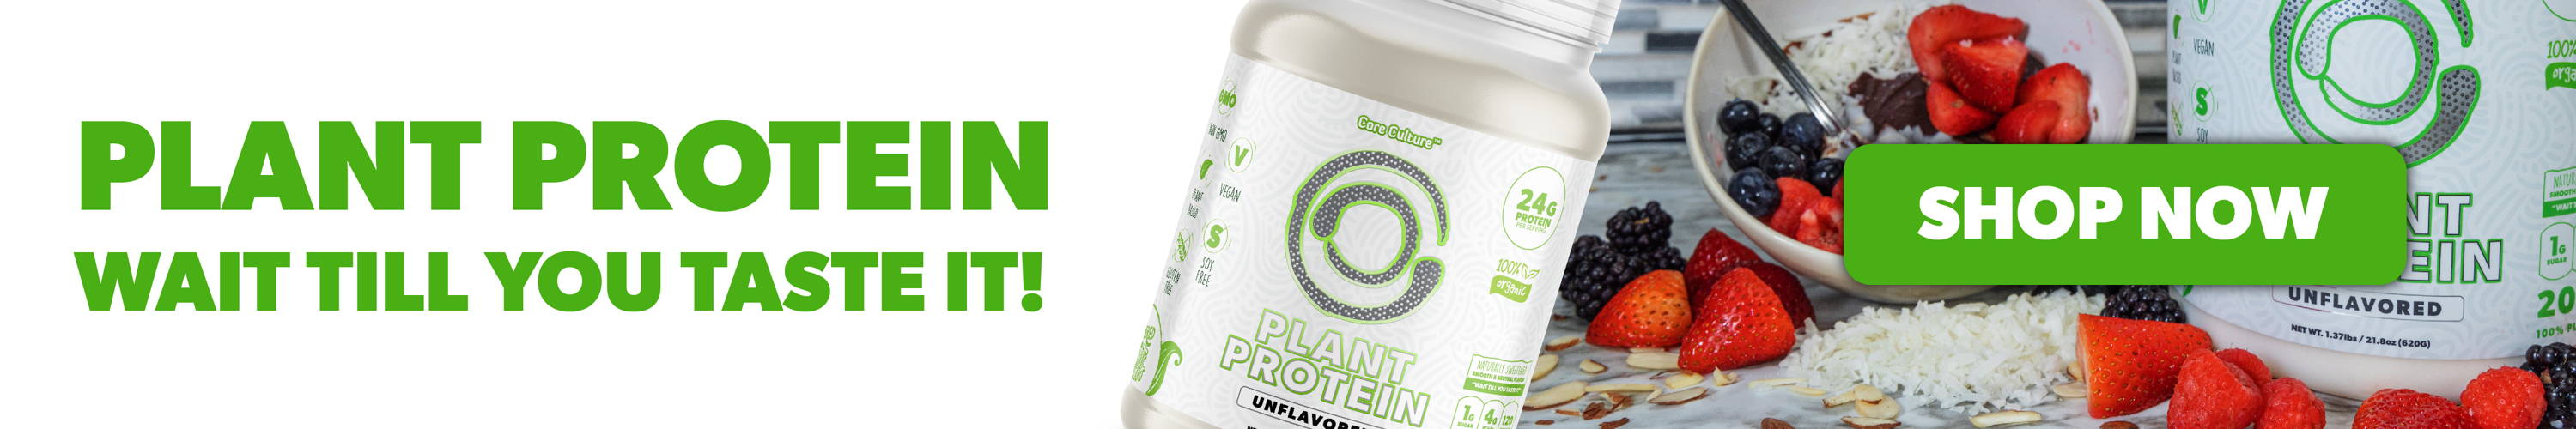 core cluture plant protein